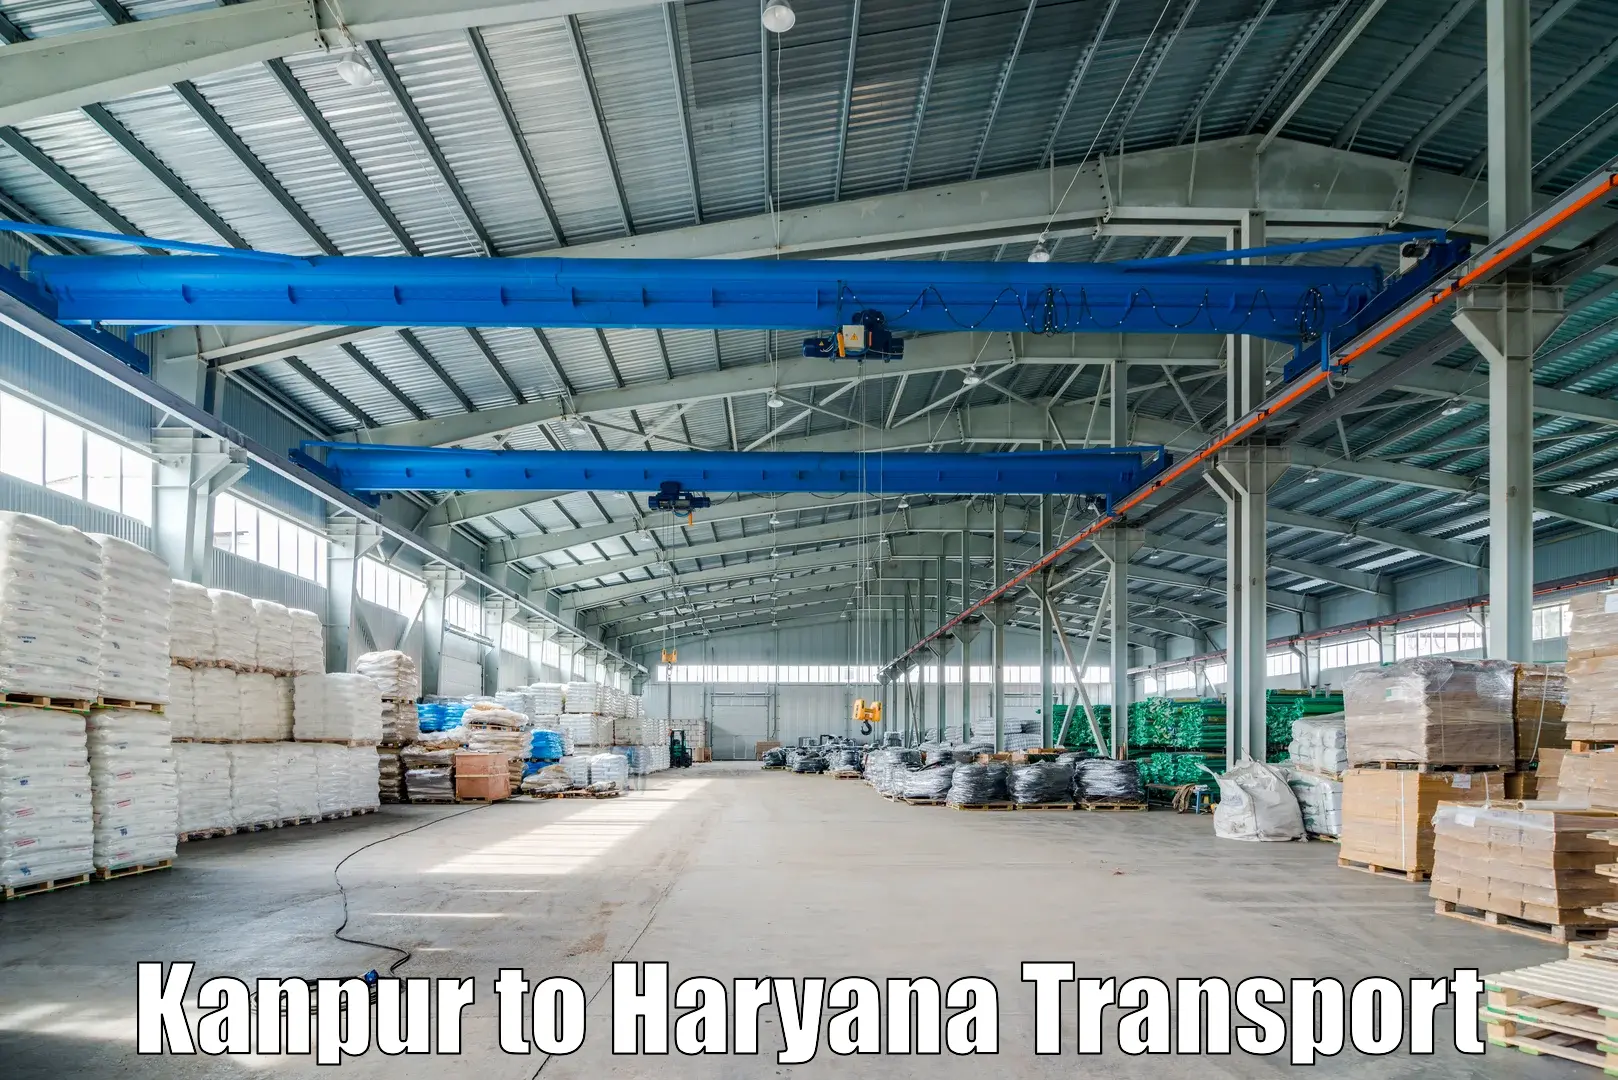 Express transport services Kanpur to NCR Haryana